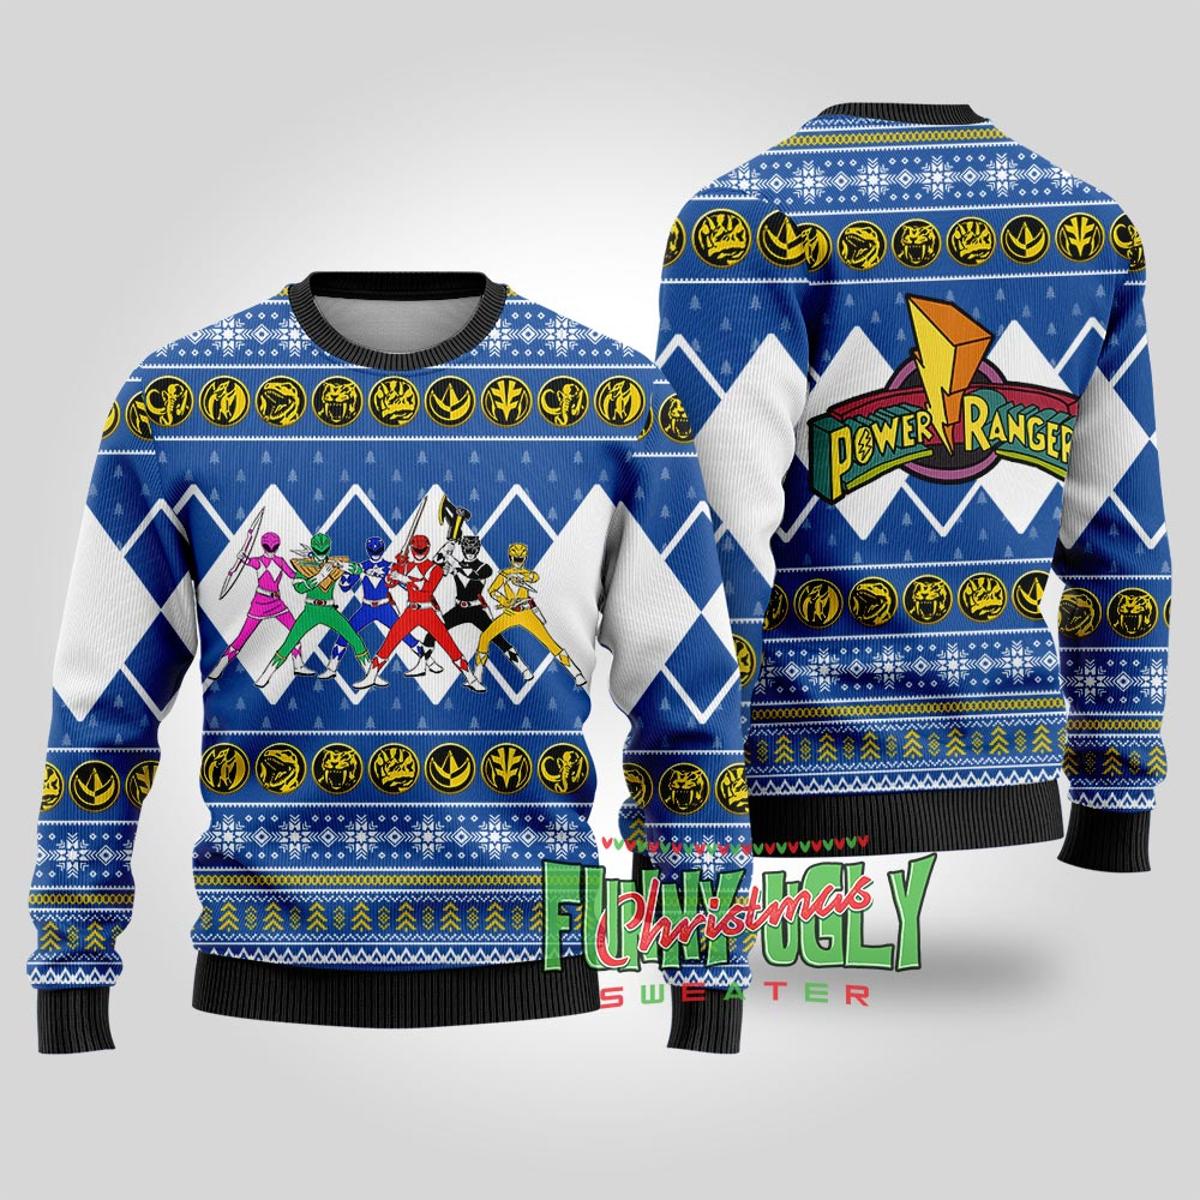 Funny The Perfect Man Christmas Sweaters Women